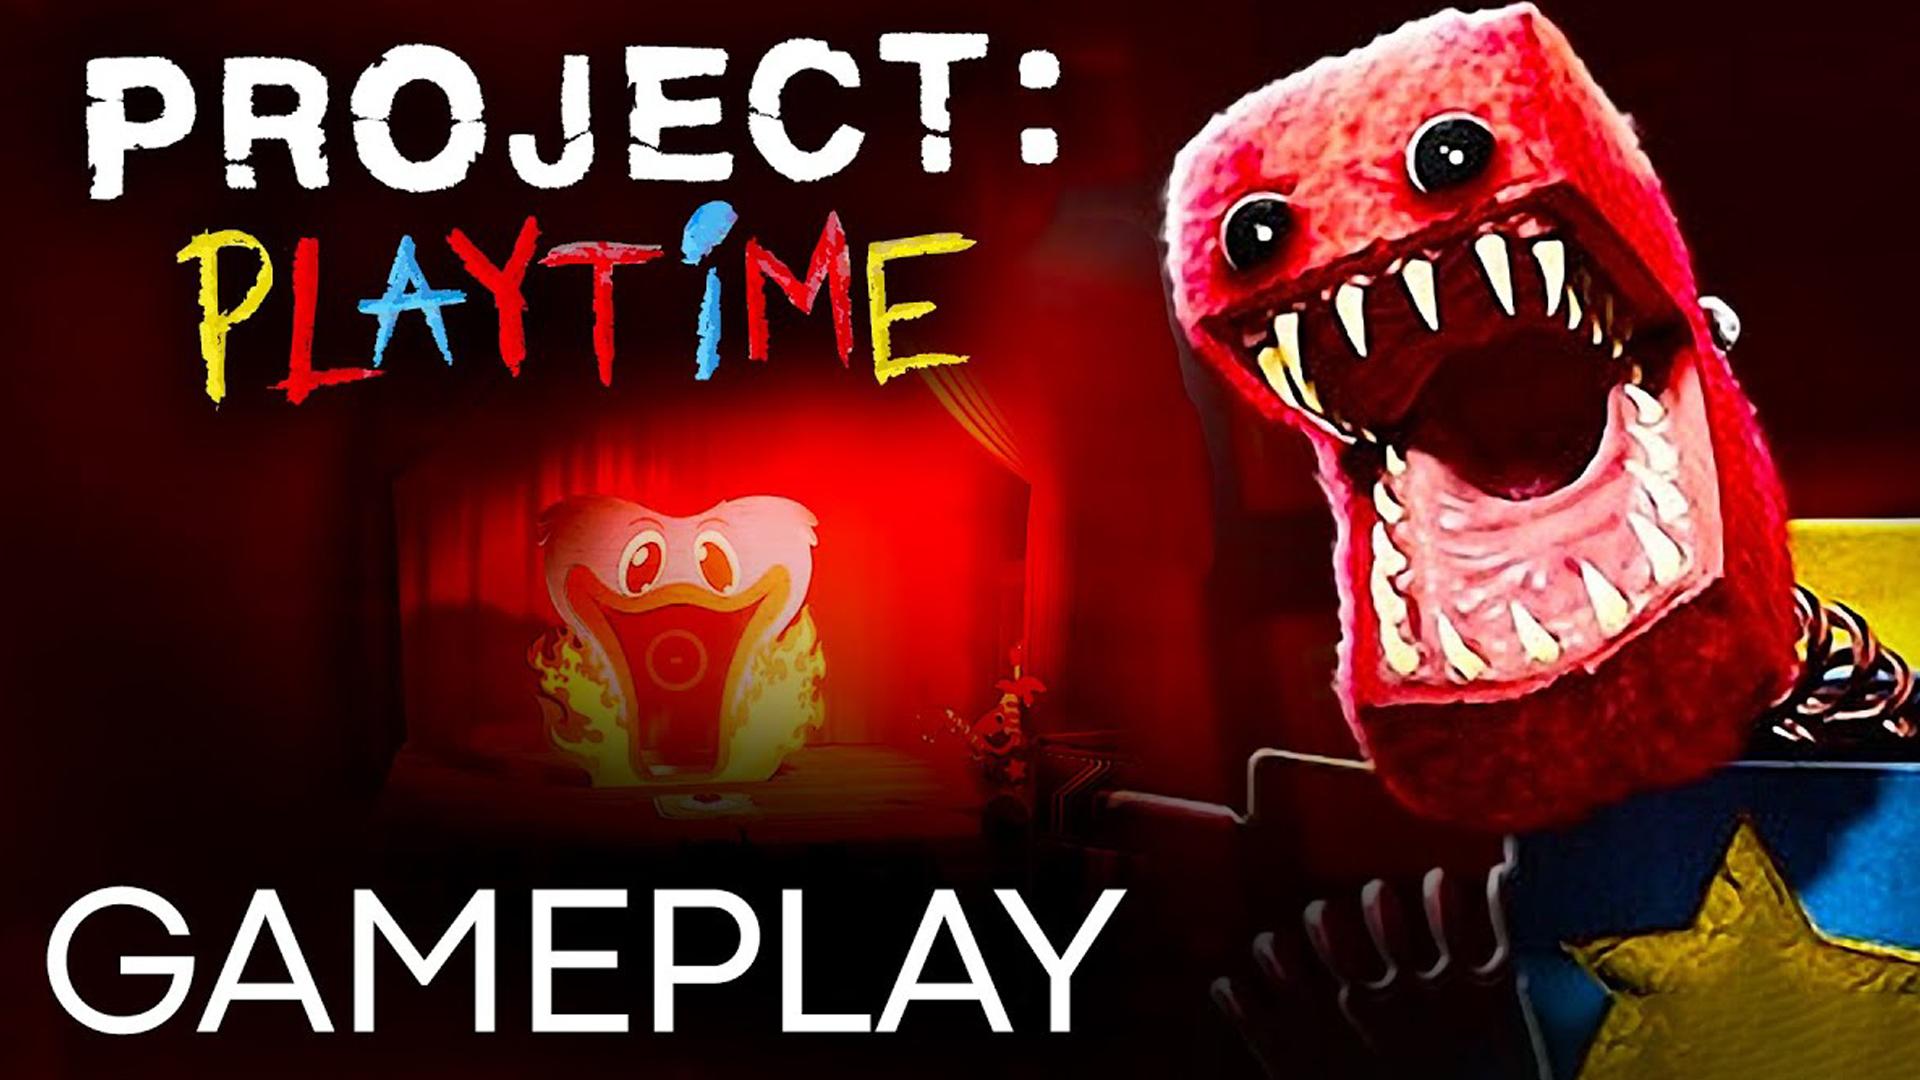 Playing project playtime